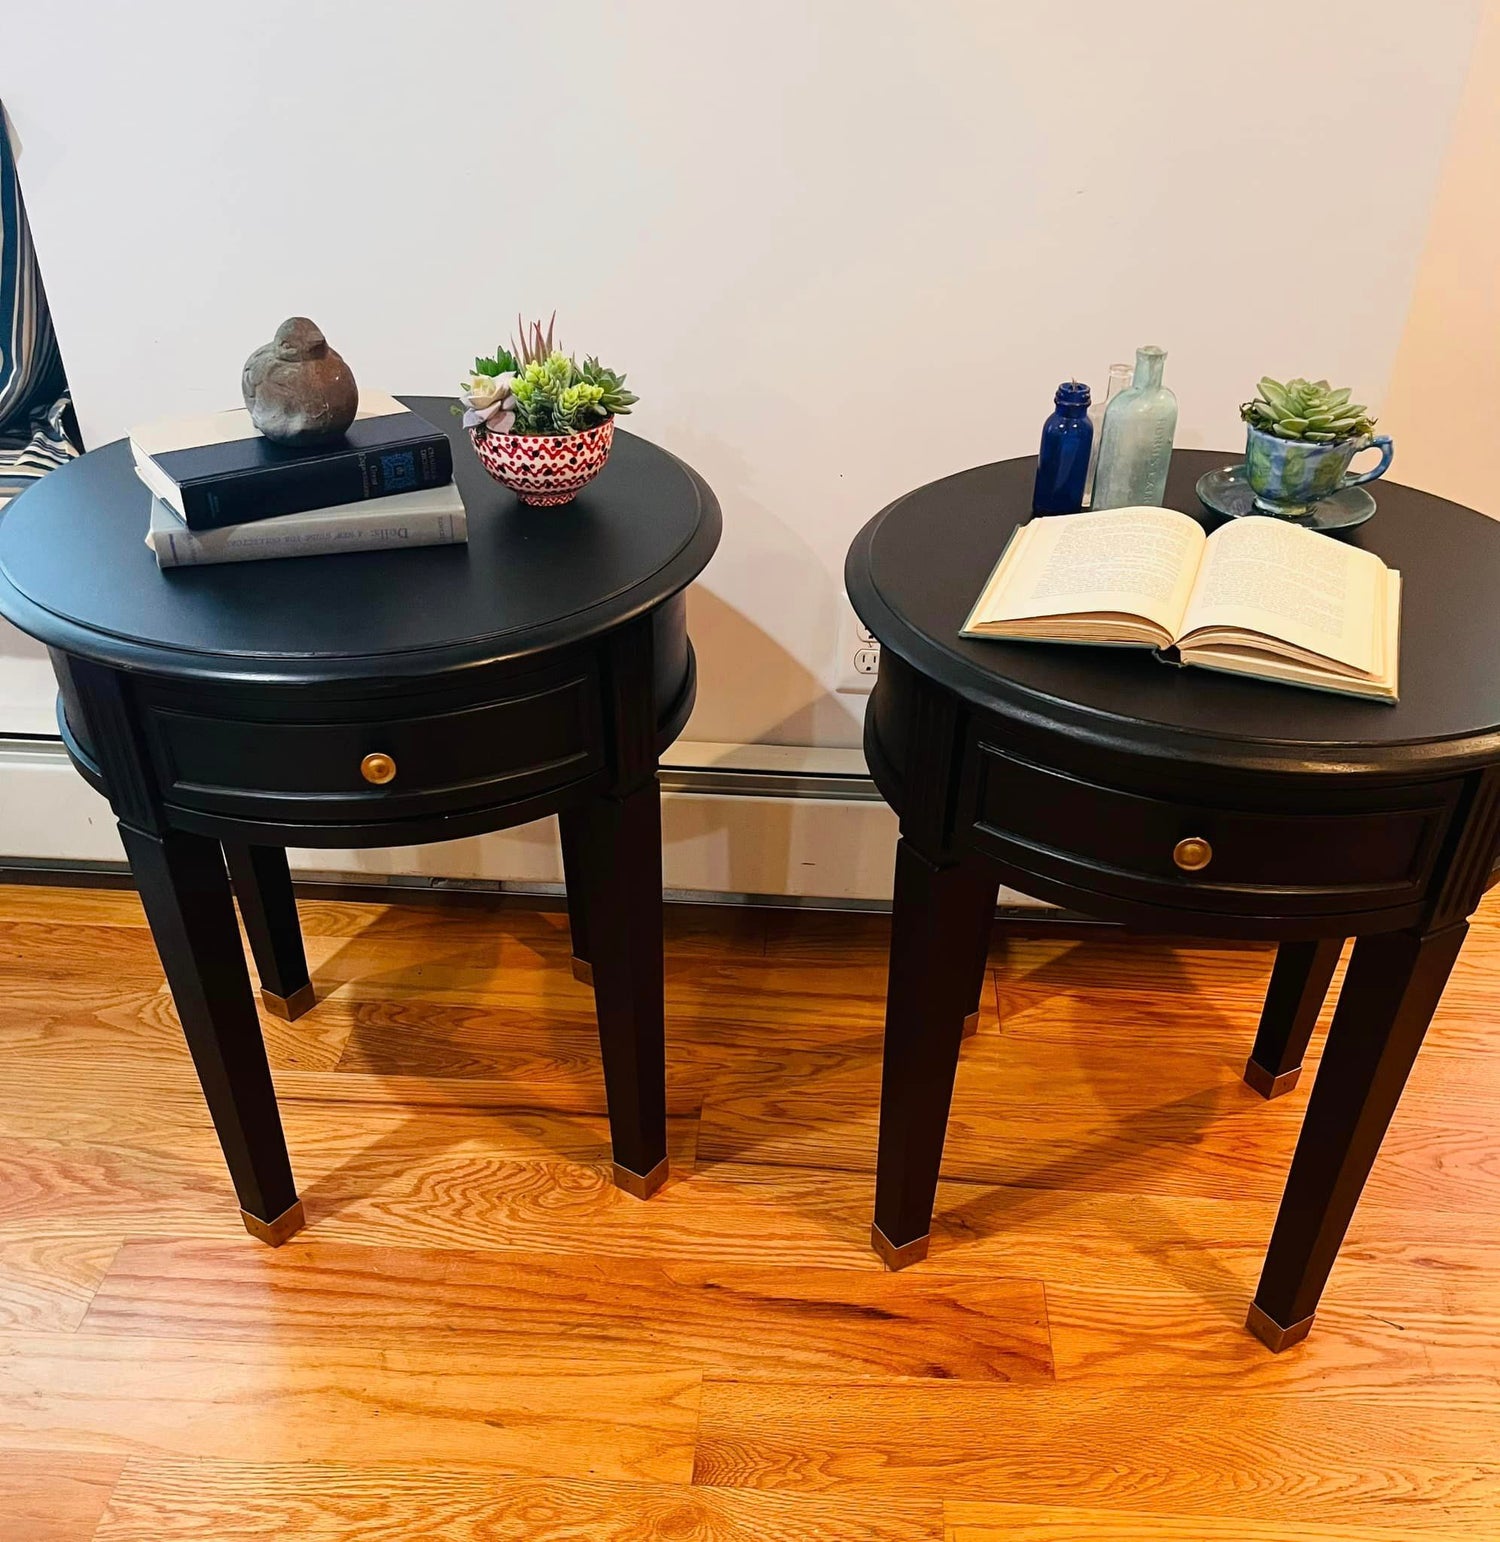 Beautiful Butterfly round end tables by The Furniture Fairy